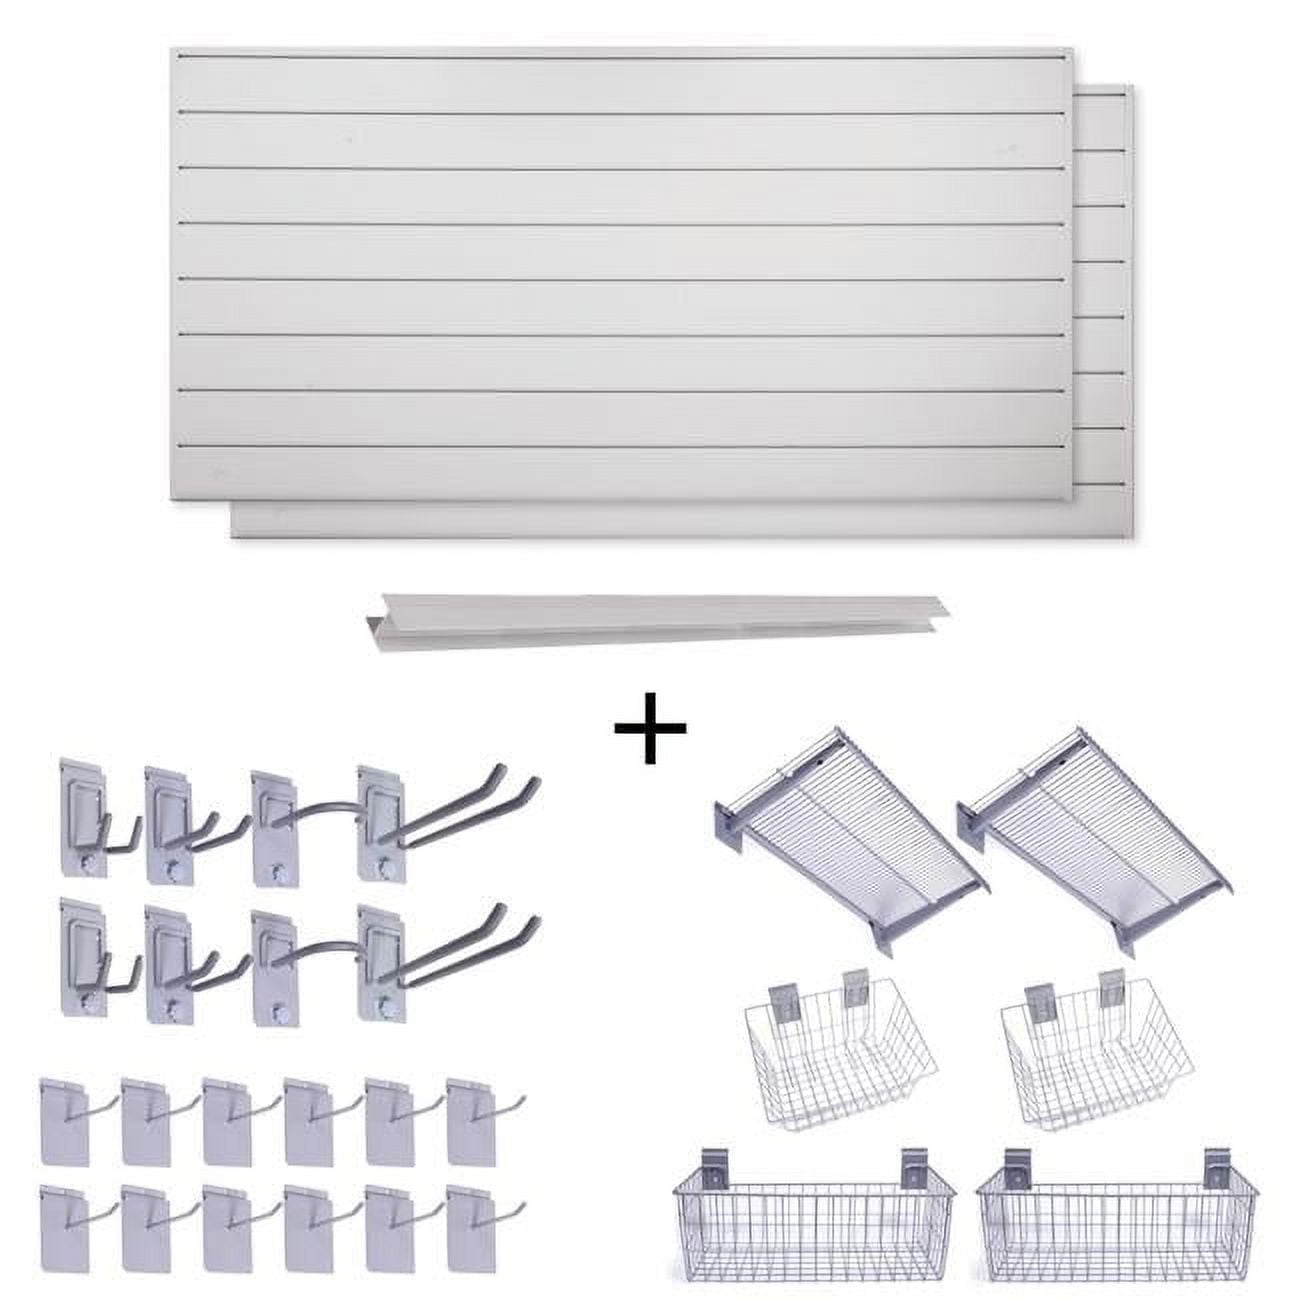 CrownWall BD688DVG26SB-K in. x 64 sq. ft. PVC Slatwall Super Bundle with  Accessory Kit#44; Dove Grey 26 Piece